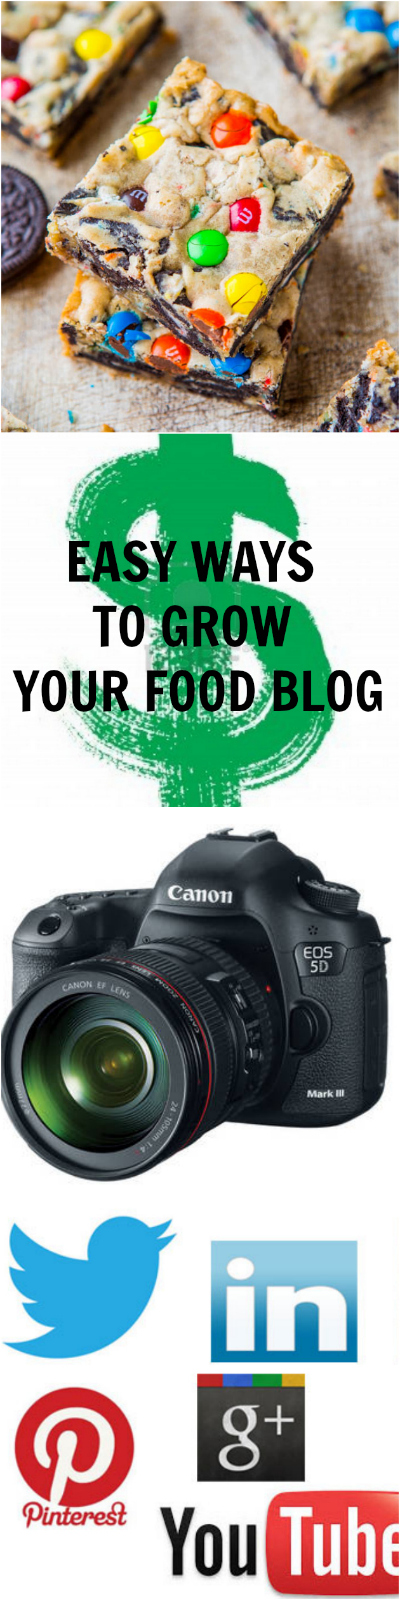 Easy Ways to Grow Your Food Blog - Easy, free, tips & tricks to bring readers to your site!